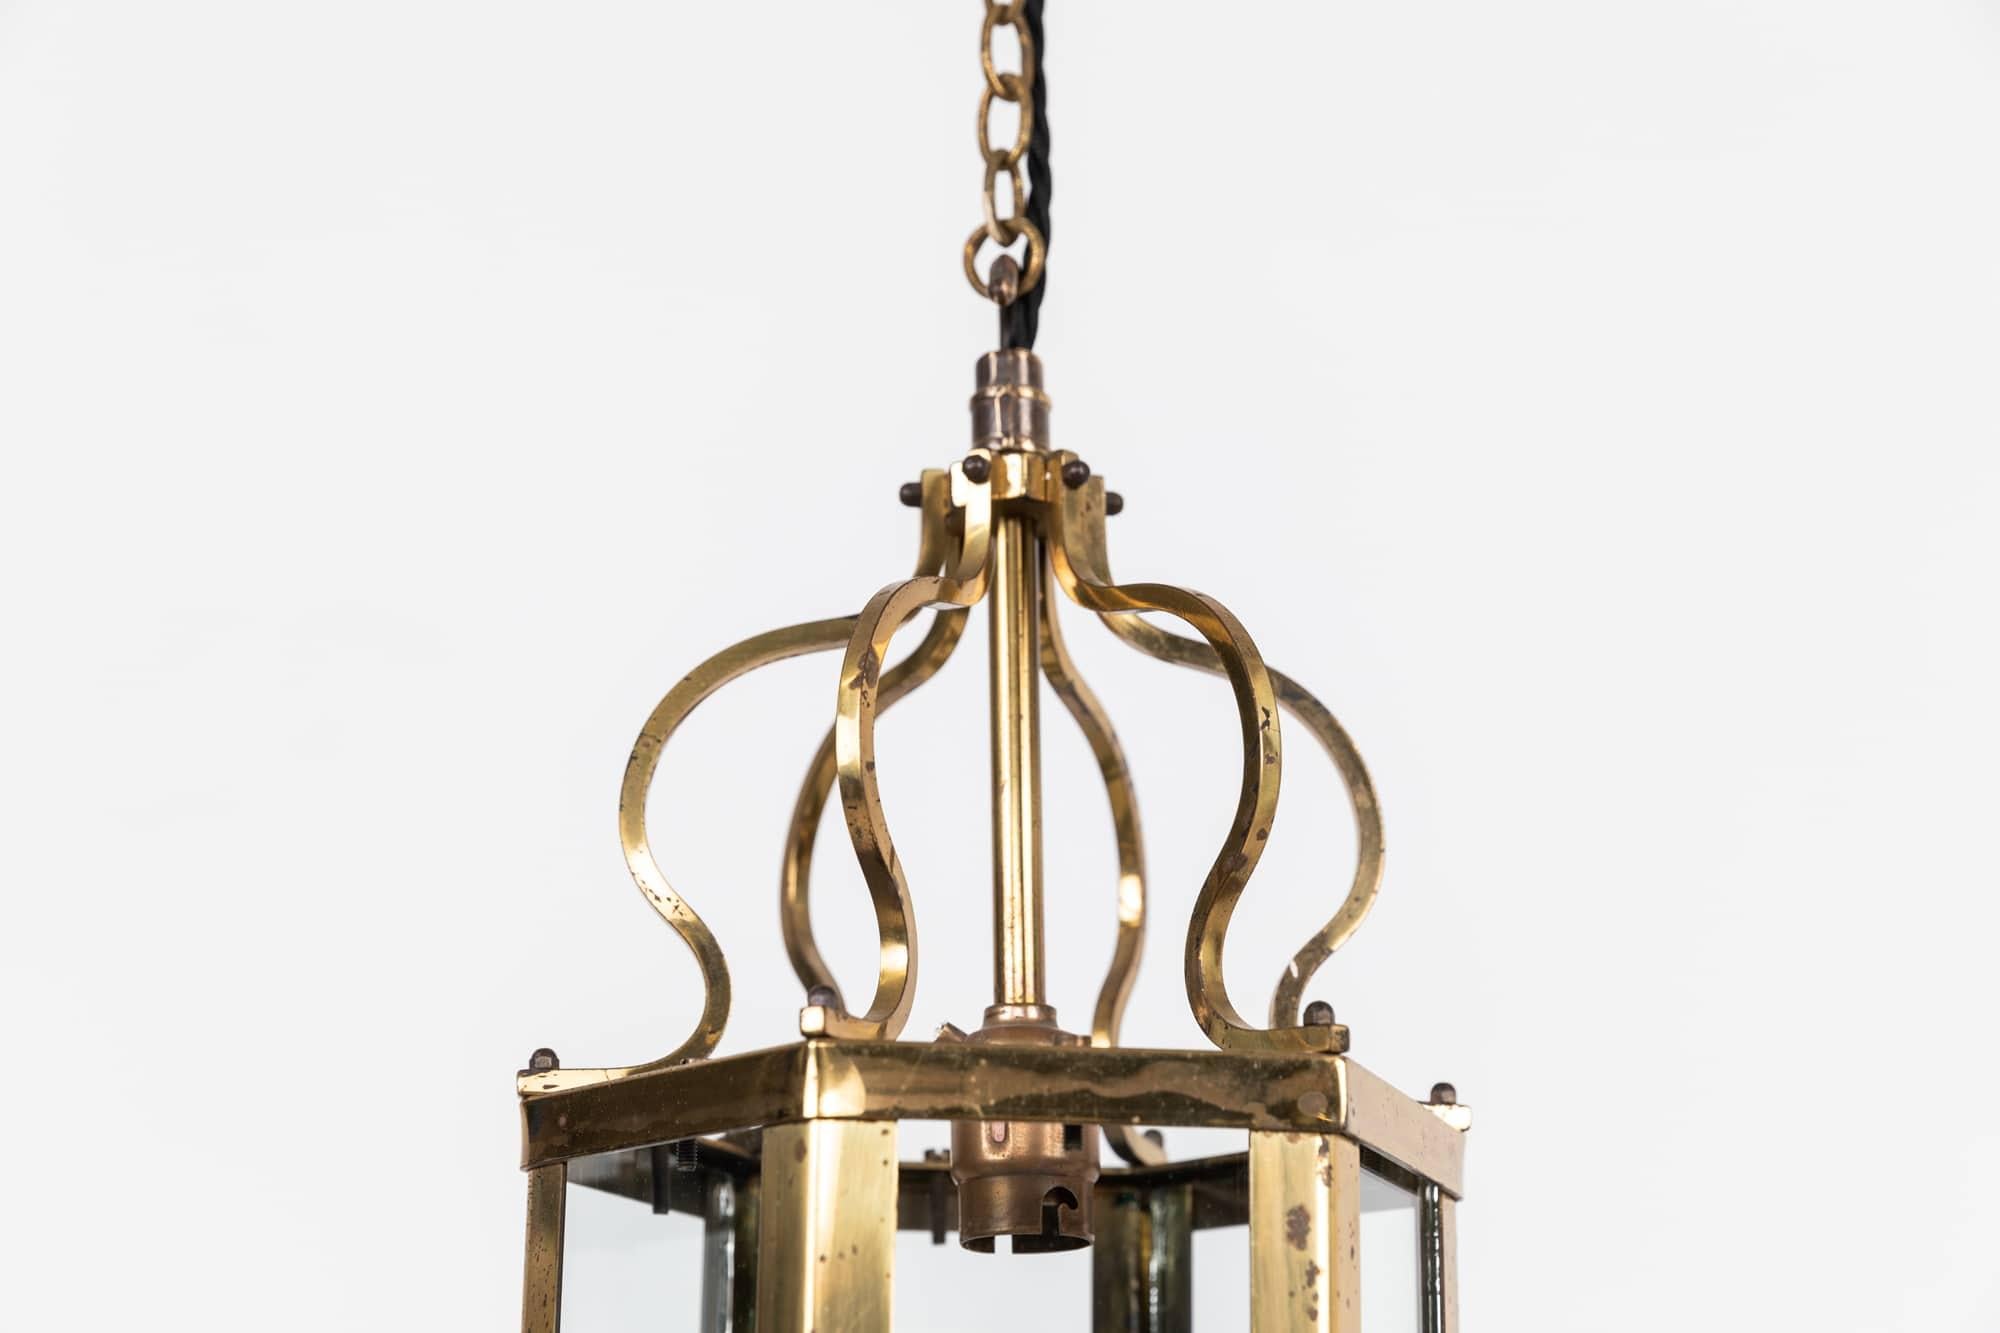 

A beautifully formed diminutive arts & crafts brass porch lantern. c.1920

Simply formed from brass, with glazed panels all original and intact. 
